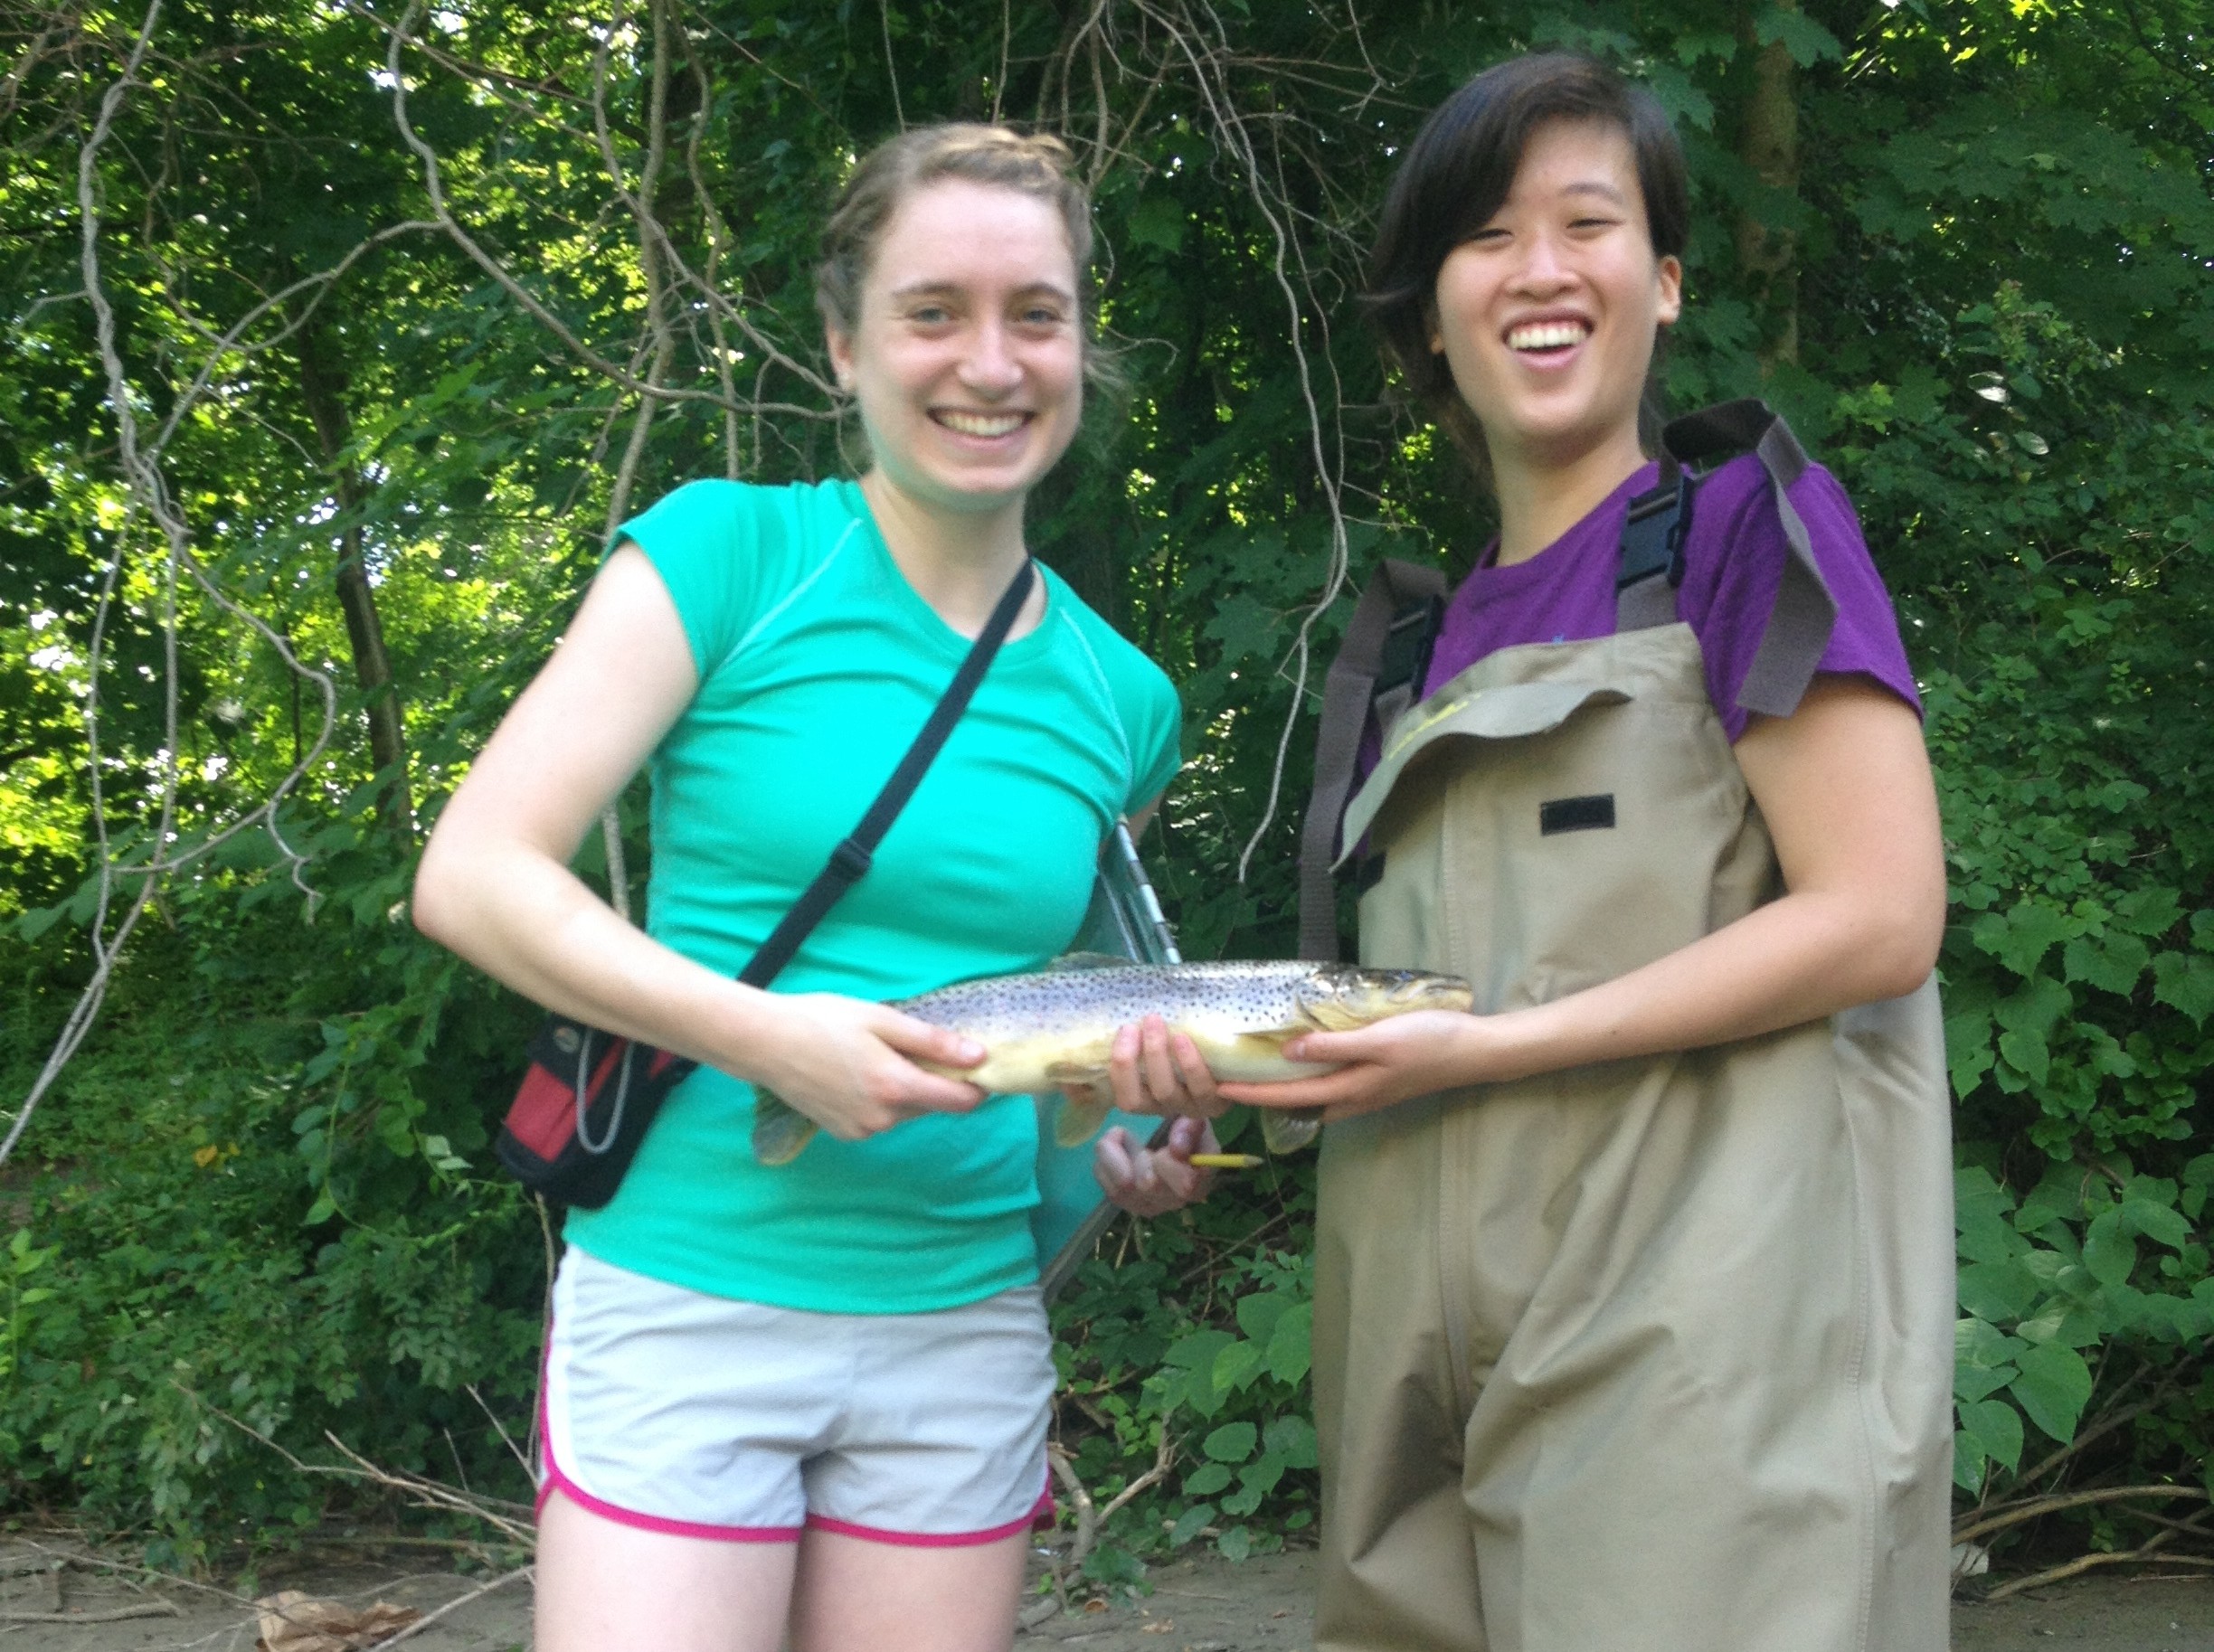 Allie Rowe (left) and Marissa Shieh (right) show off a big catch after electrofishing in the Hoosic River for their summer chemistry research.